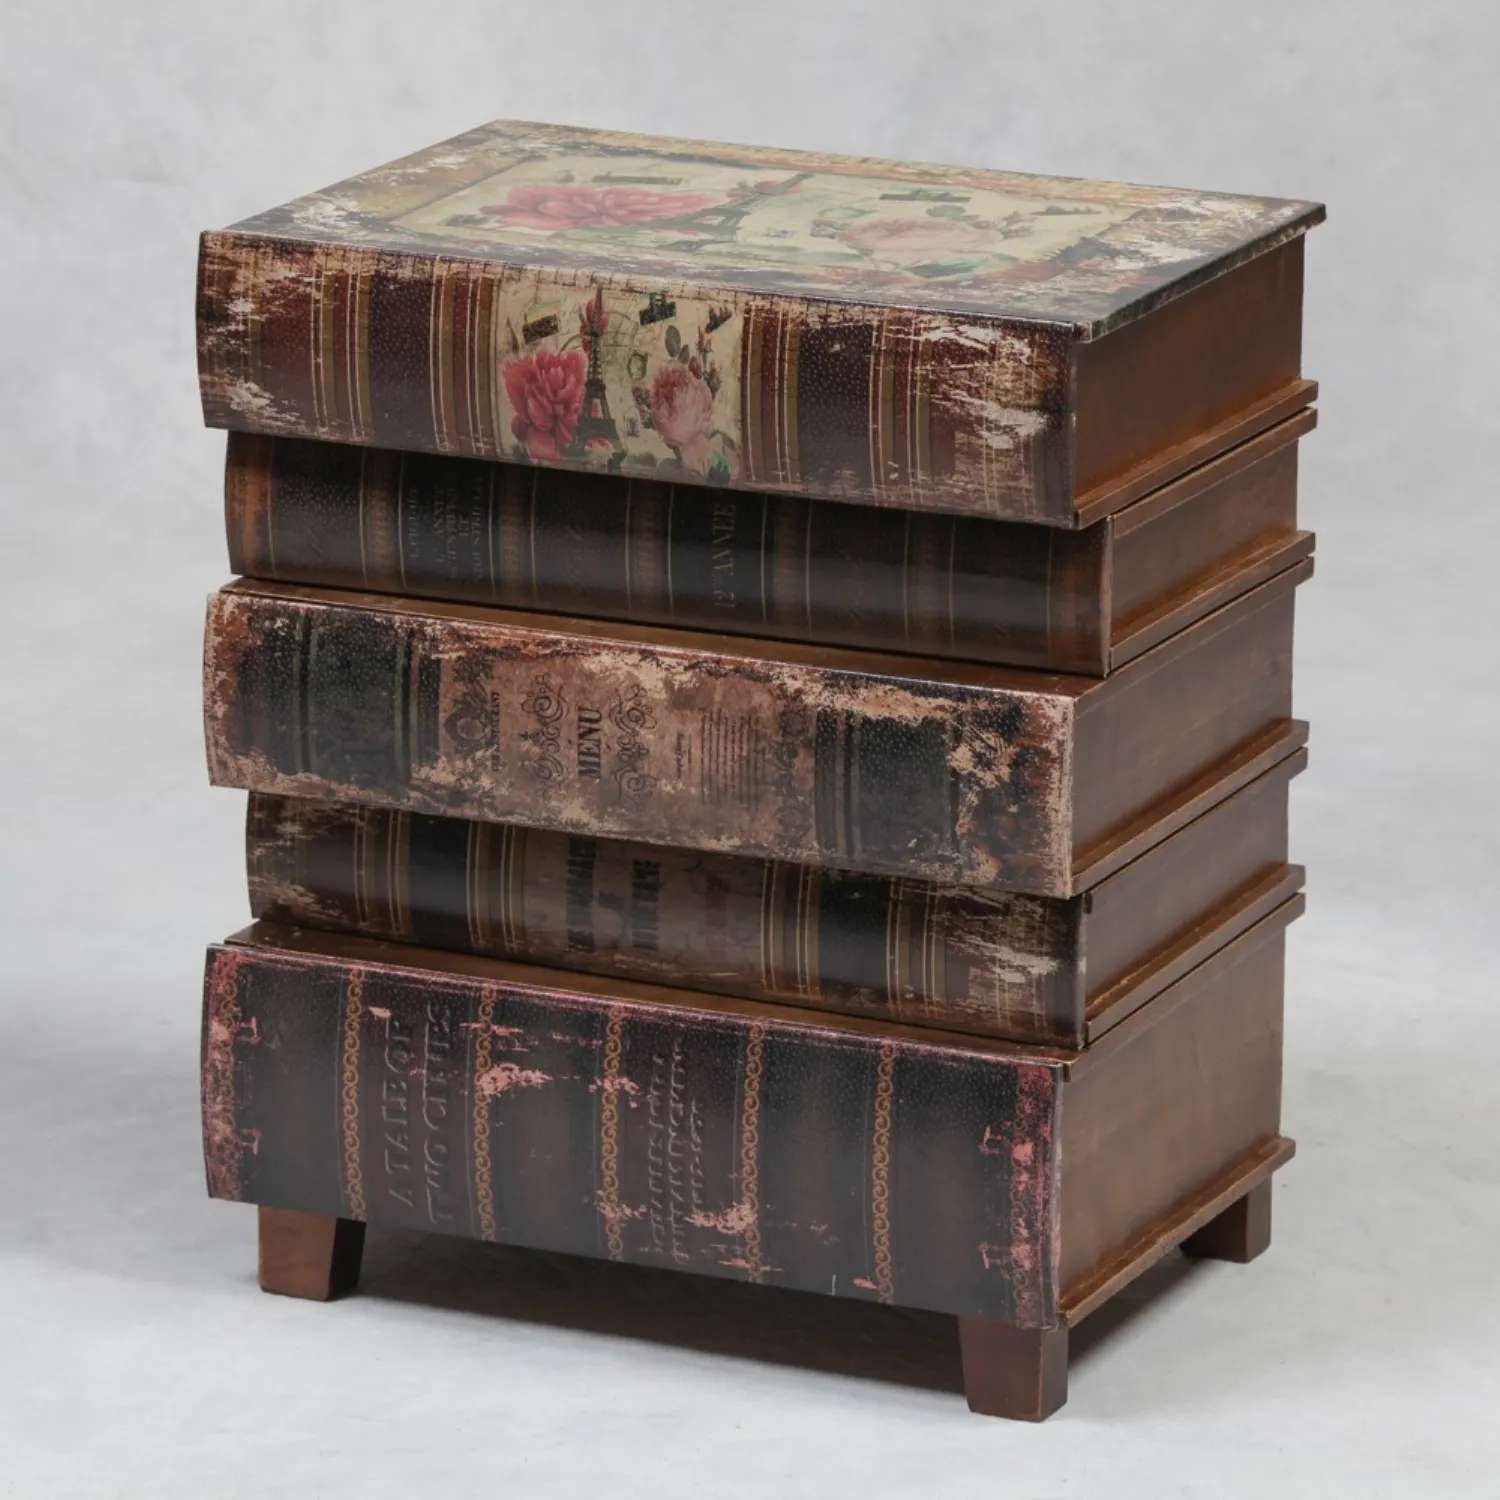 Aged Vintage Antique Style Stacked Books Bedside Lamp Table Chest of 5 Drawers